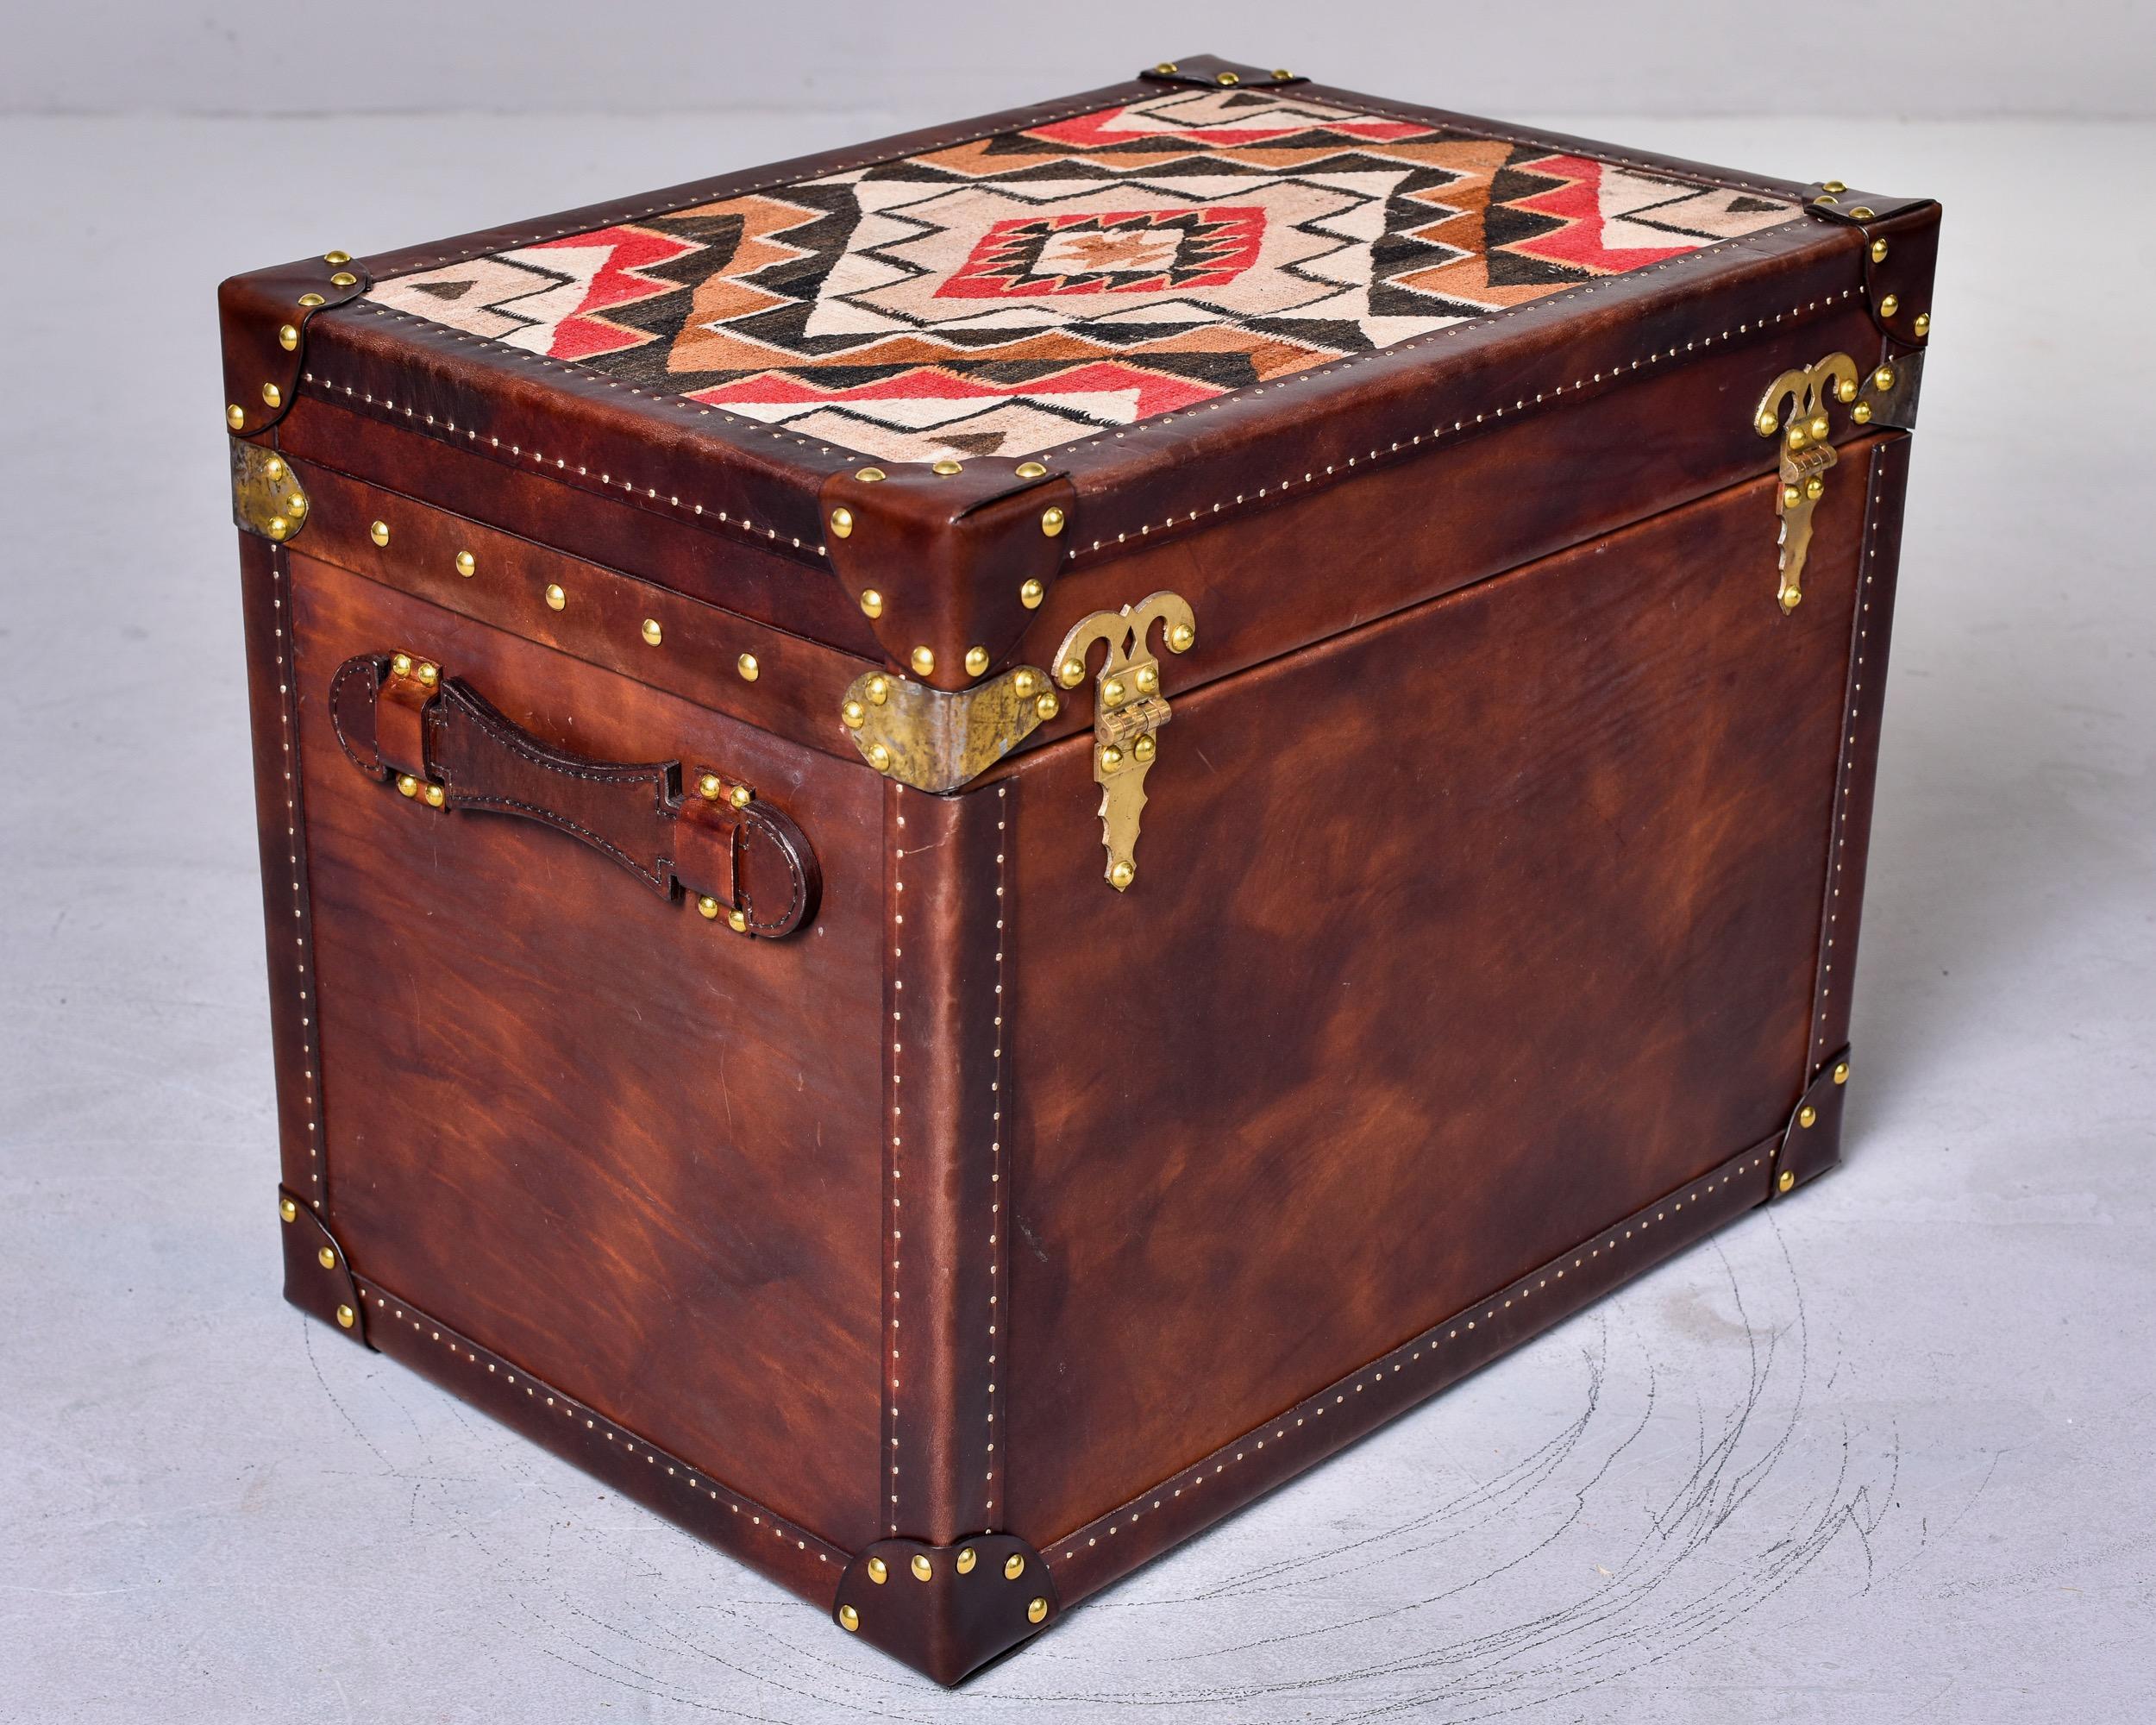 Brass Leather Covered Trunk with Vintage Hardware and Kilim on Top Panel For Sale